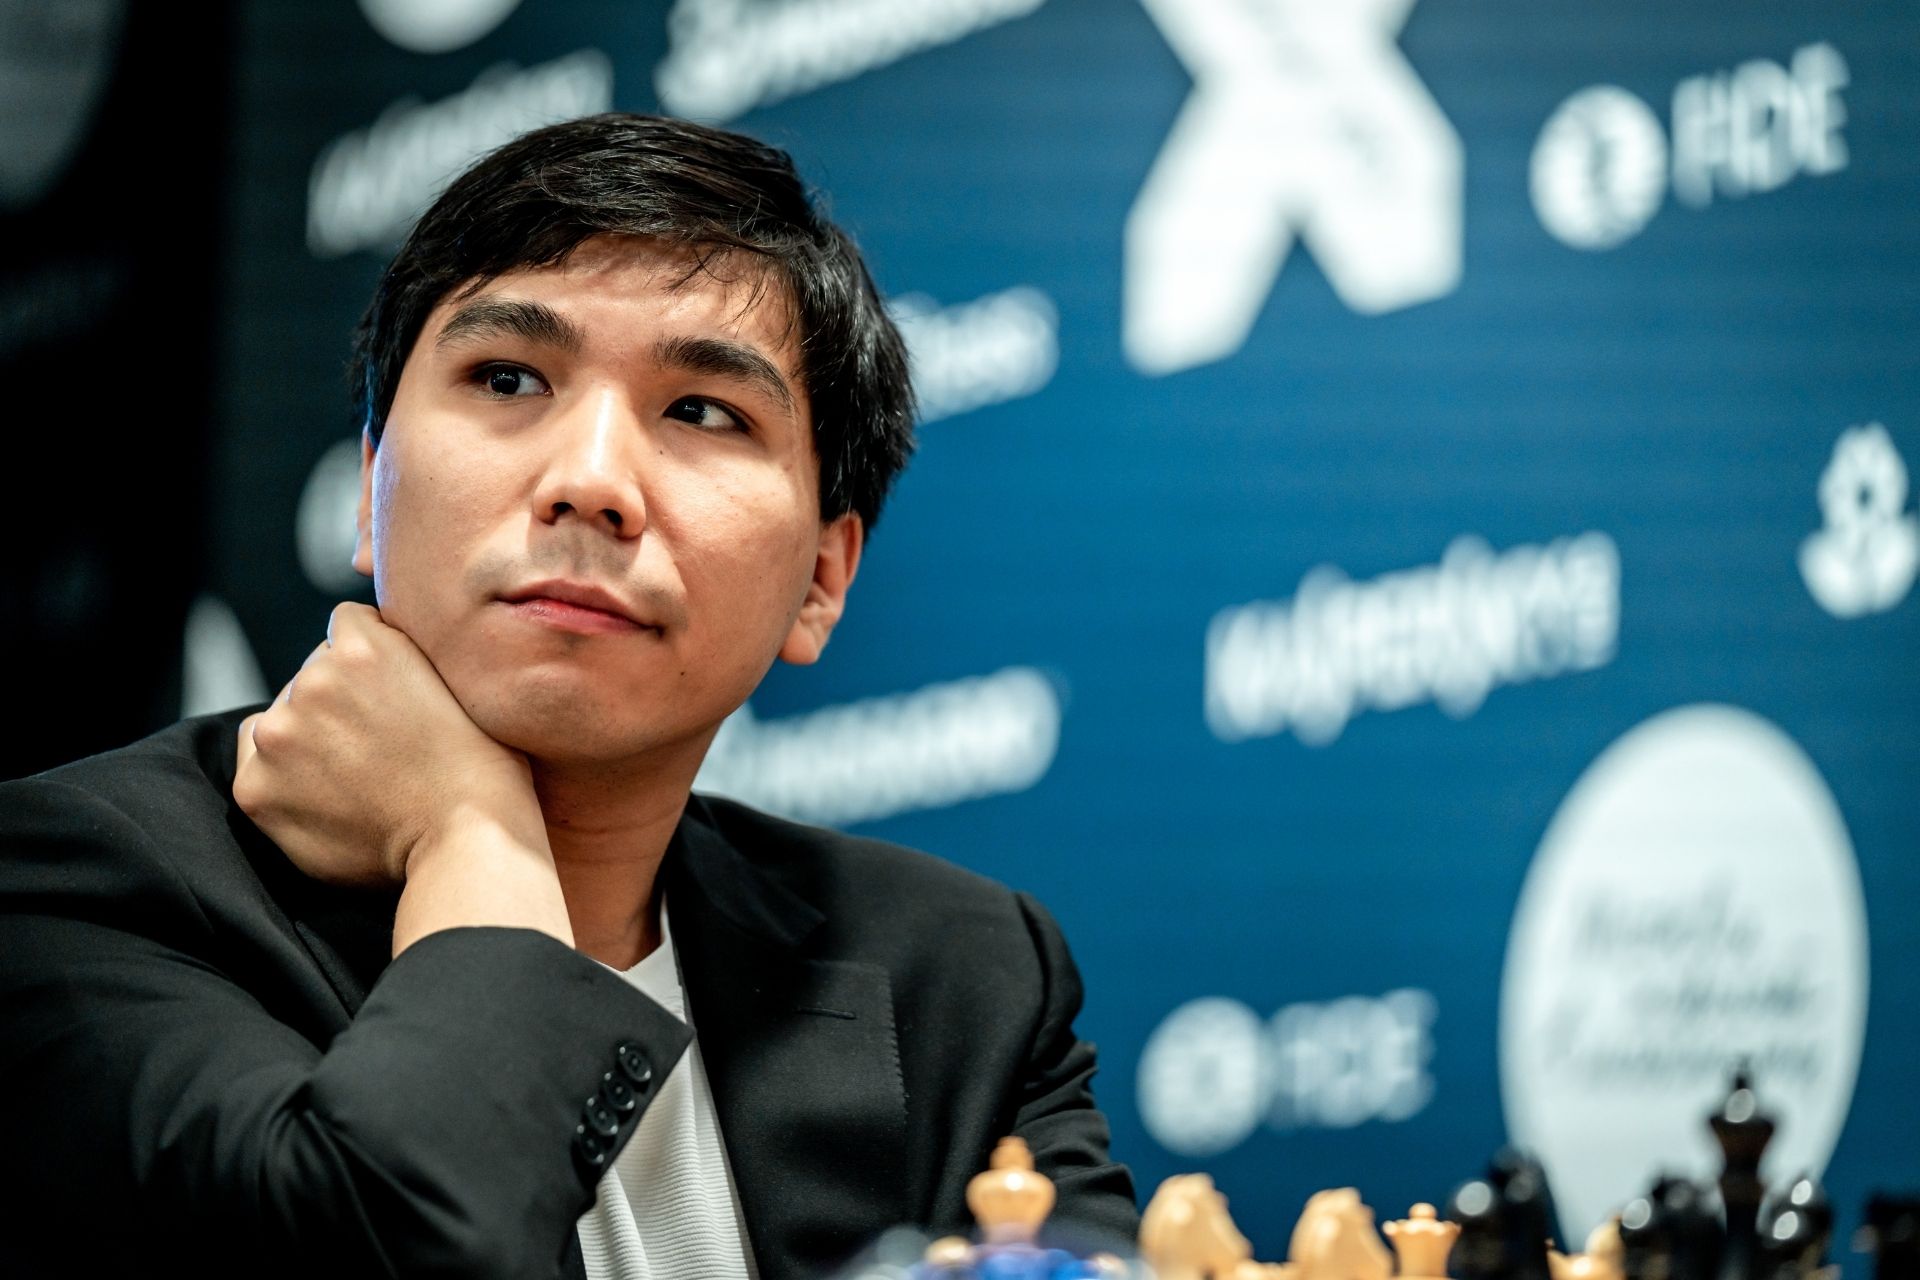 Wesley So  Grand Chess Tour